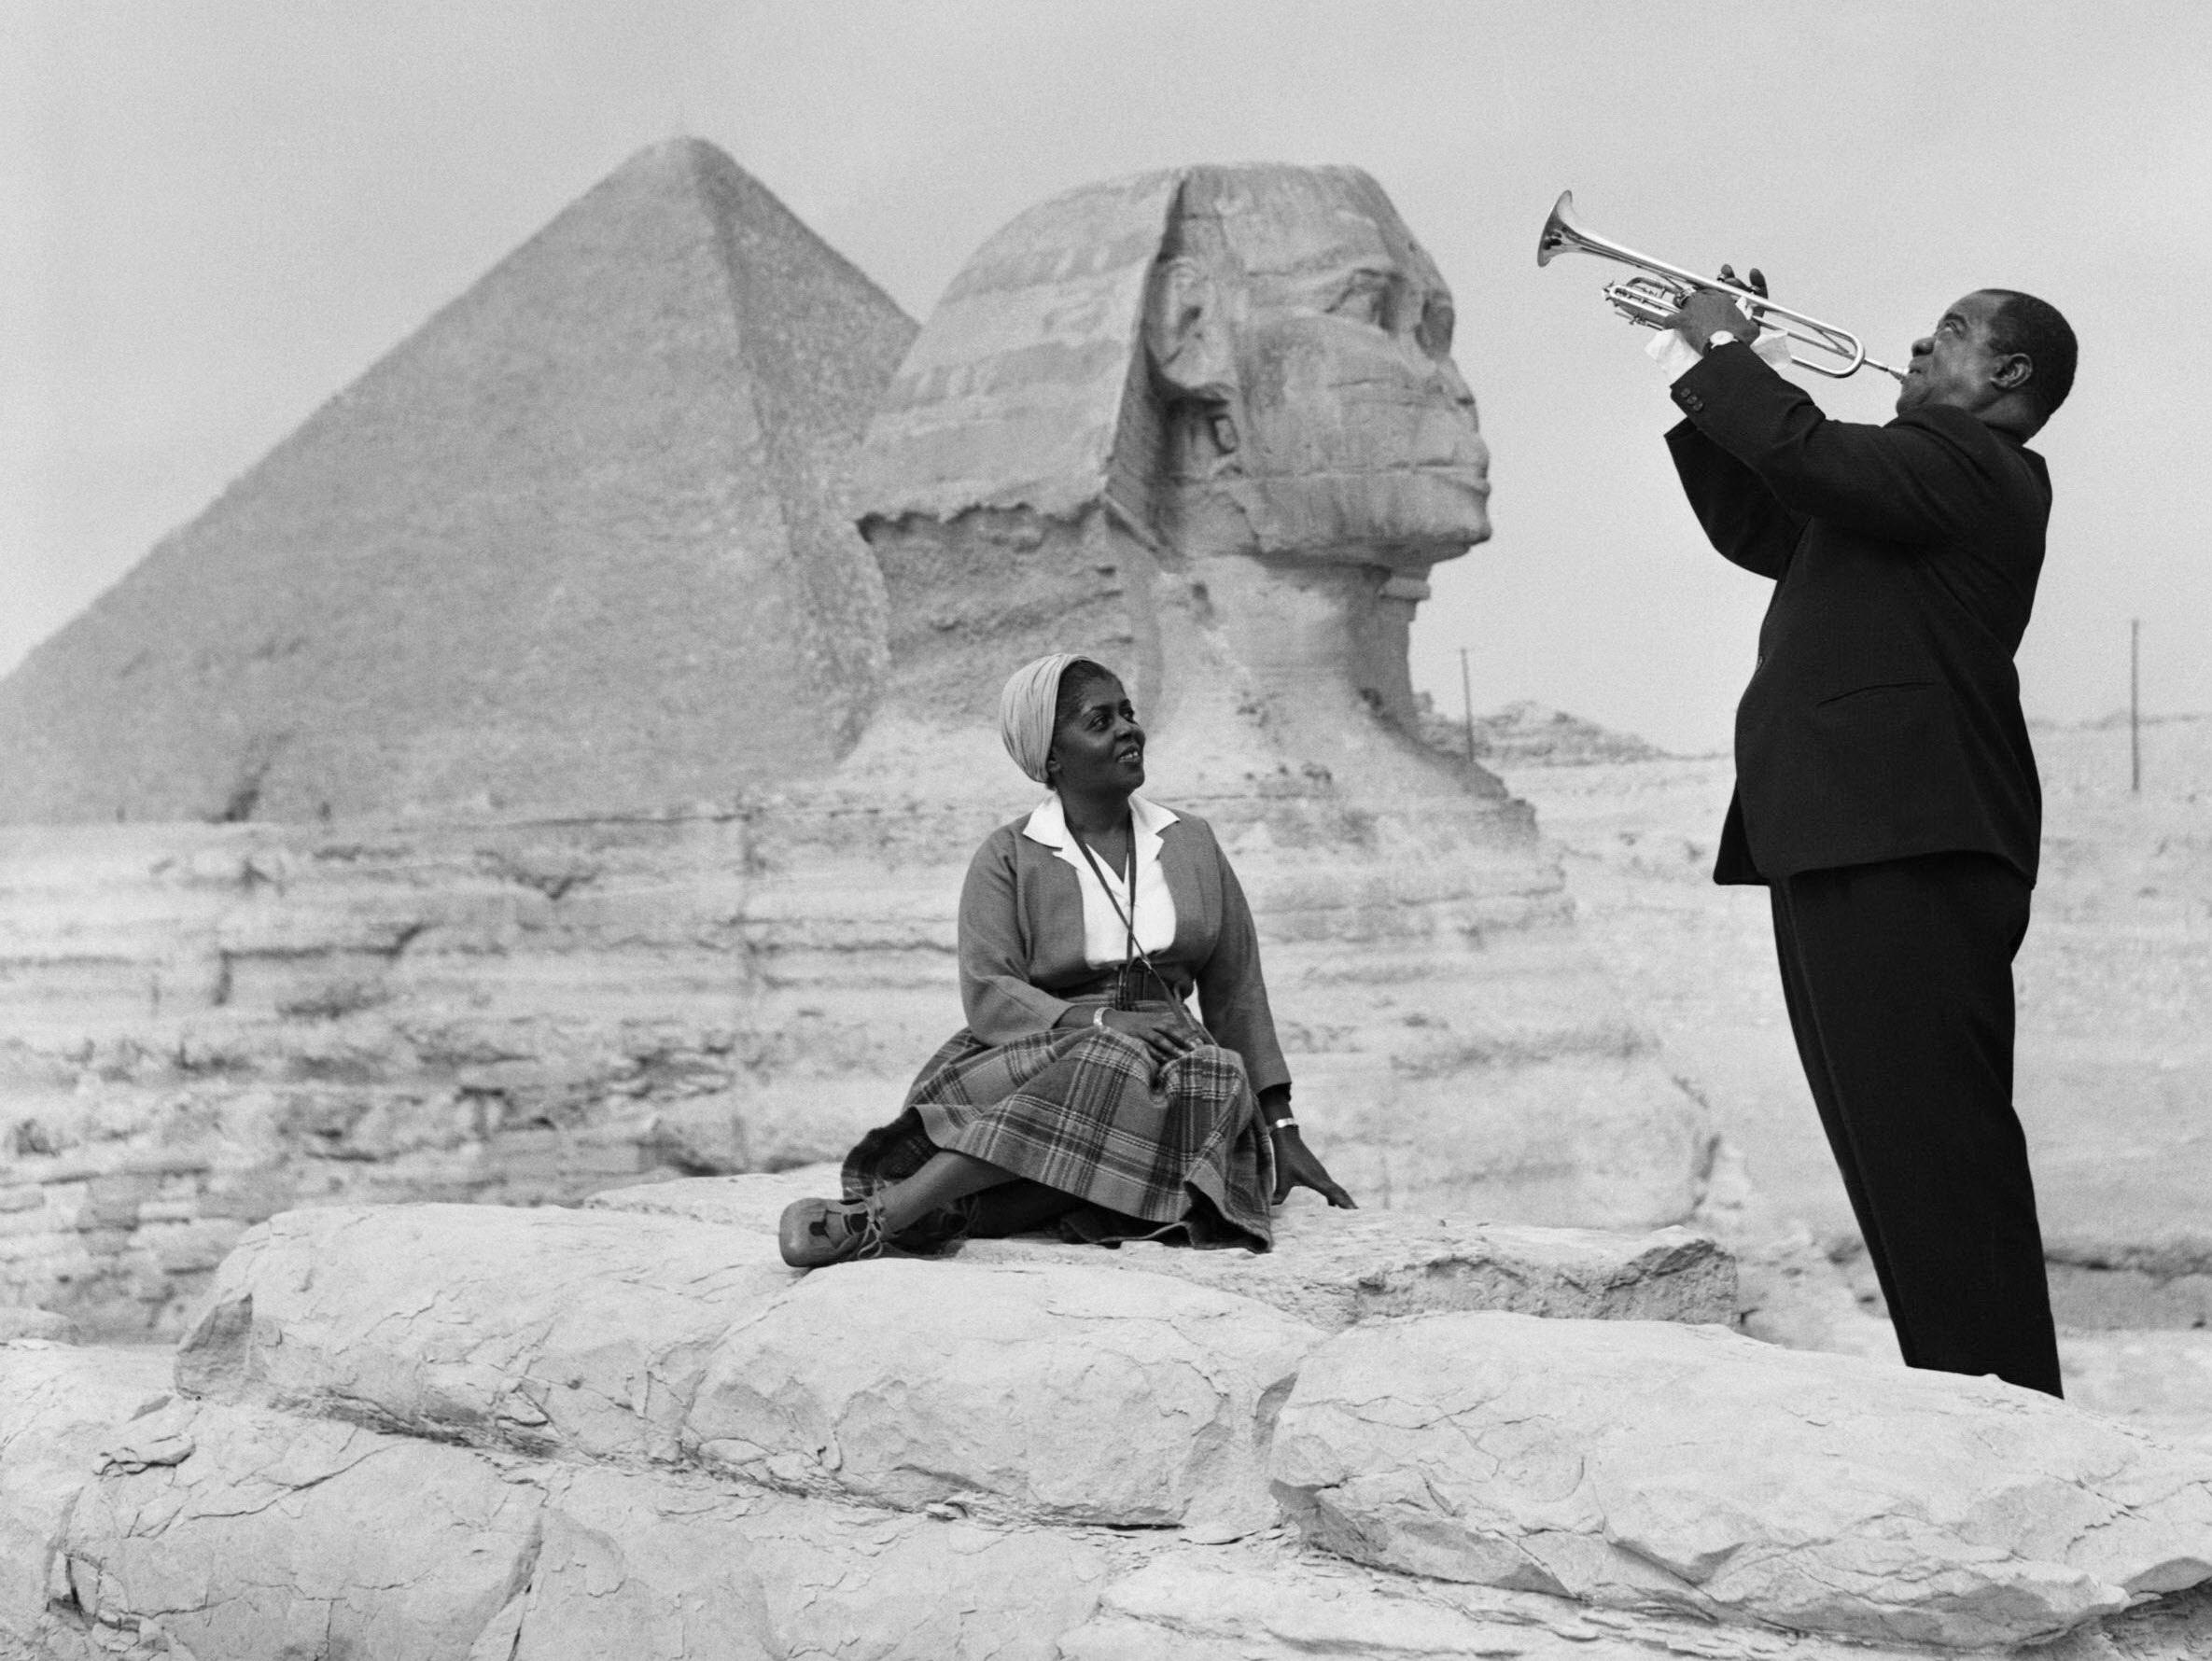 Louis+Armstrong+playing+for+his+wife+in+front+of+the+Sphinx+by+the+pyramids+in+Giza%2C+1961